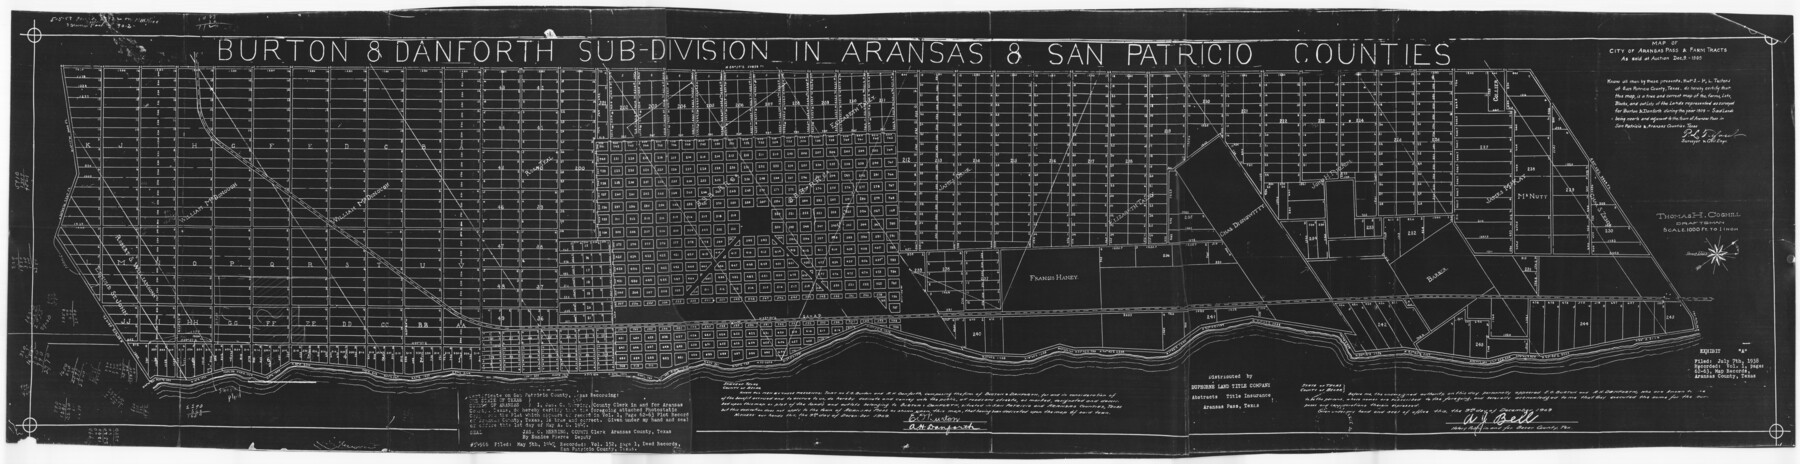 8422, Aransas County Rolled Sketch 30, General Map Collection